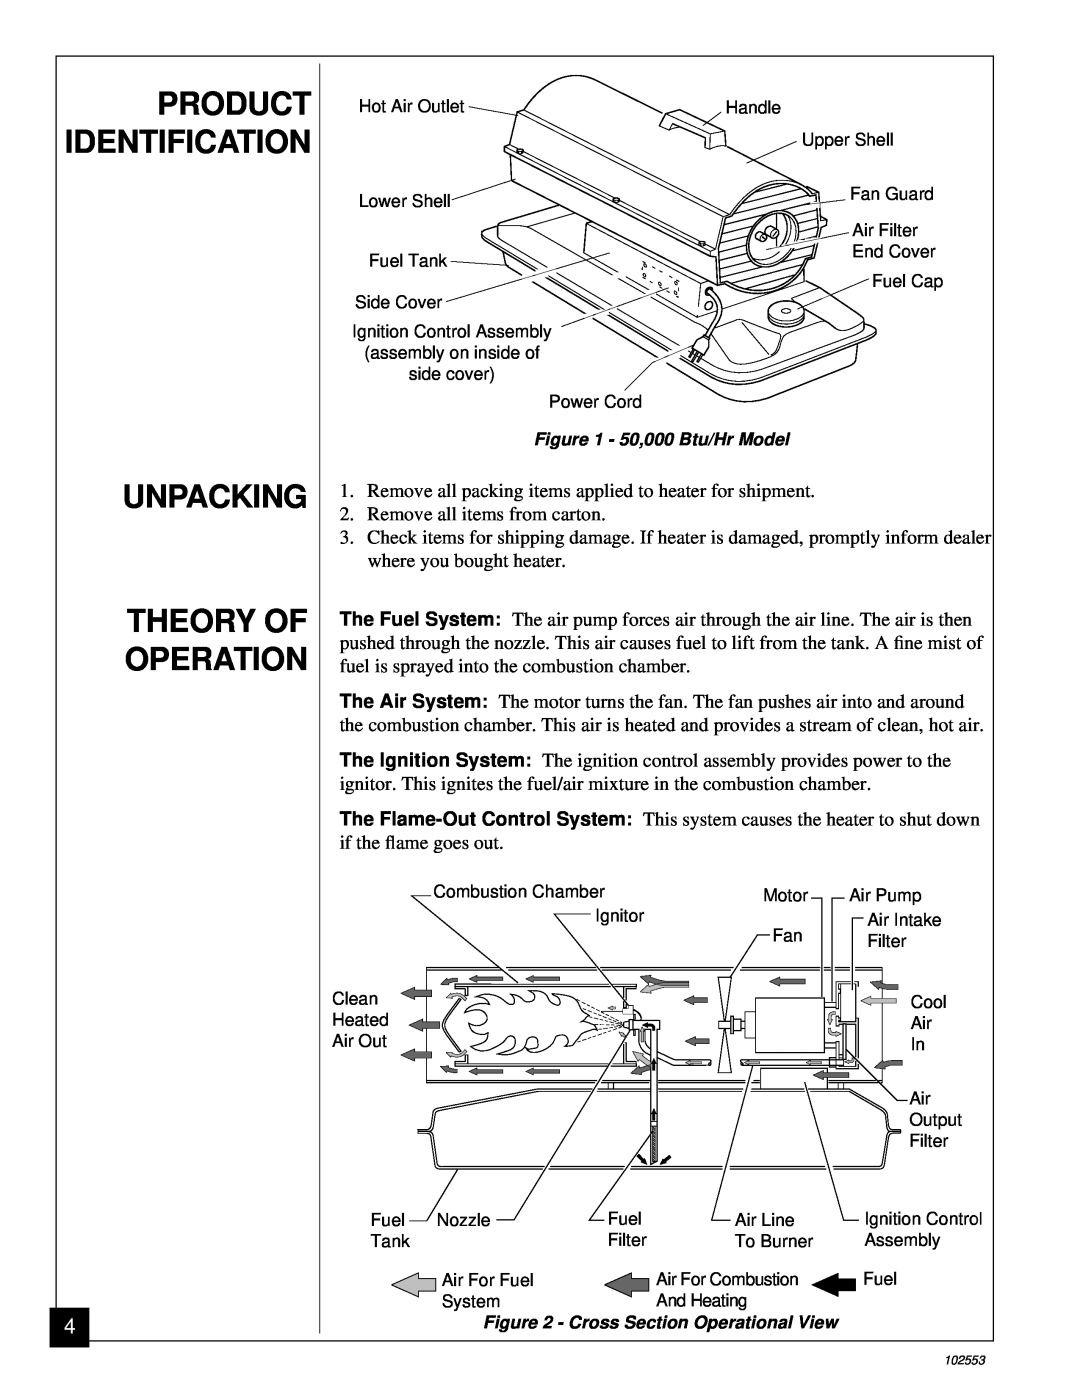 Desa REM50C, B50H owner manual Unpacking Theory Of Operation, Product Identification 